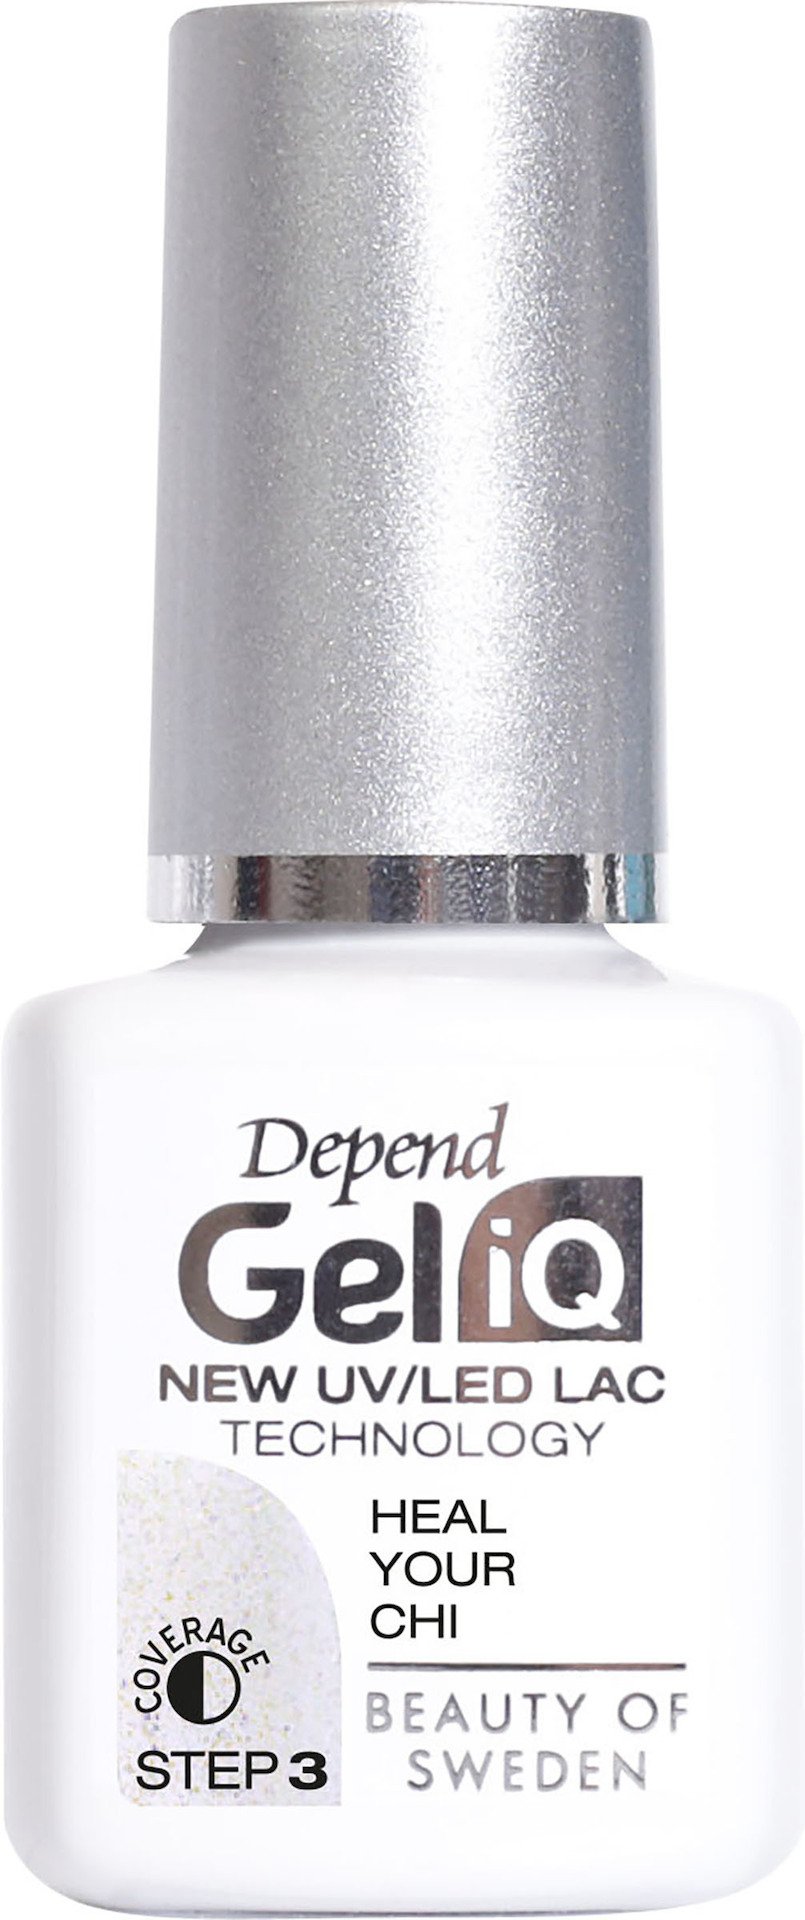 Depend Gel iQ Heal your chi 5 ml